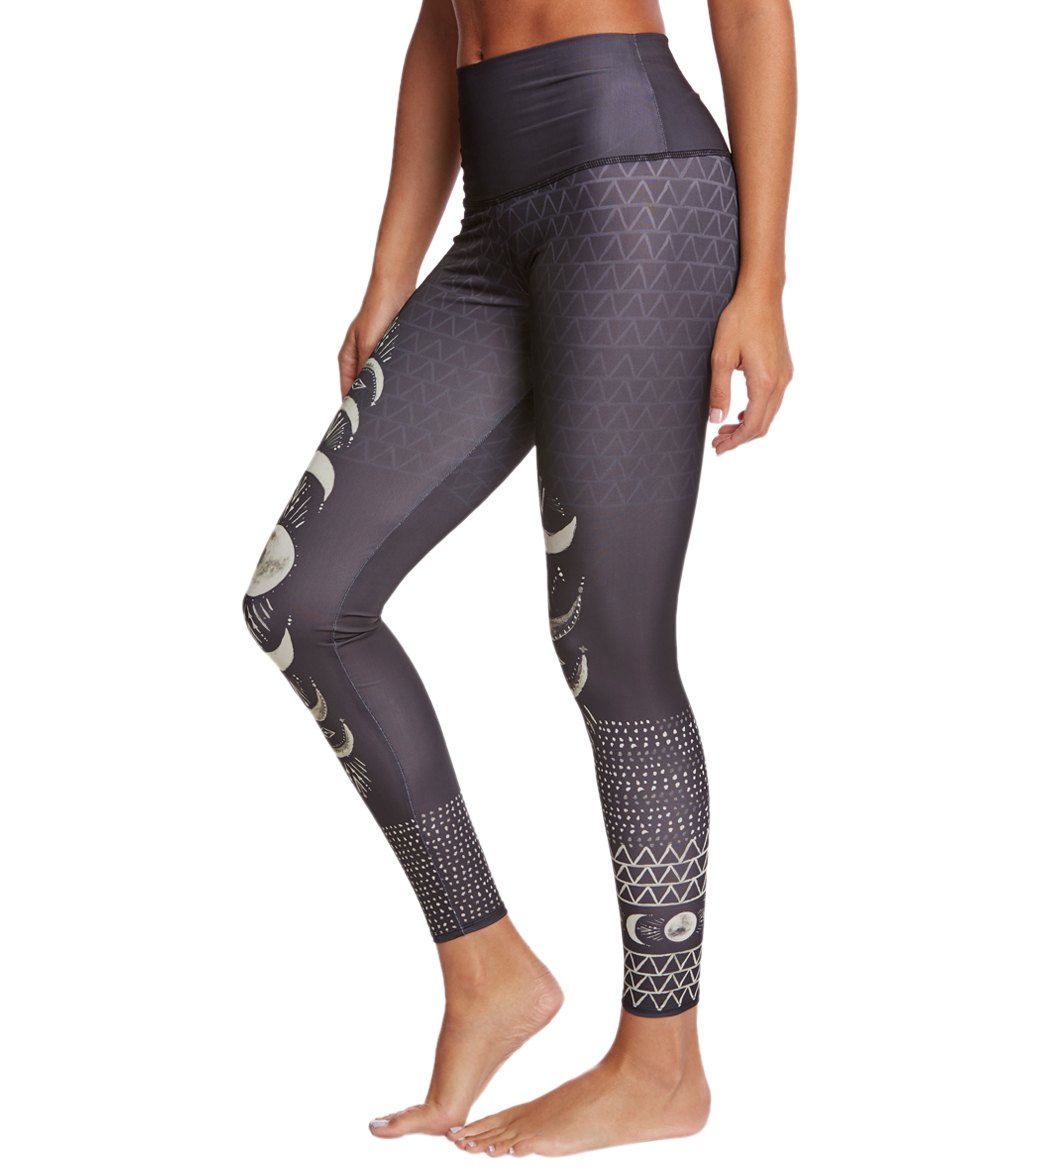 Onzie Workout Legging Giveaway